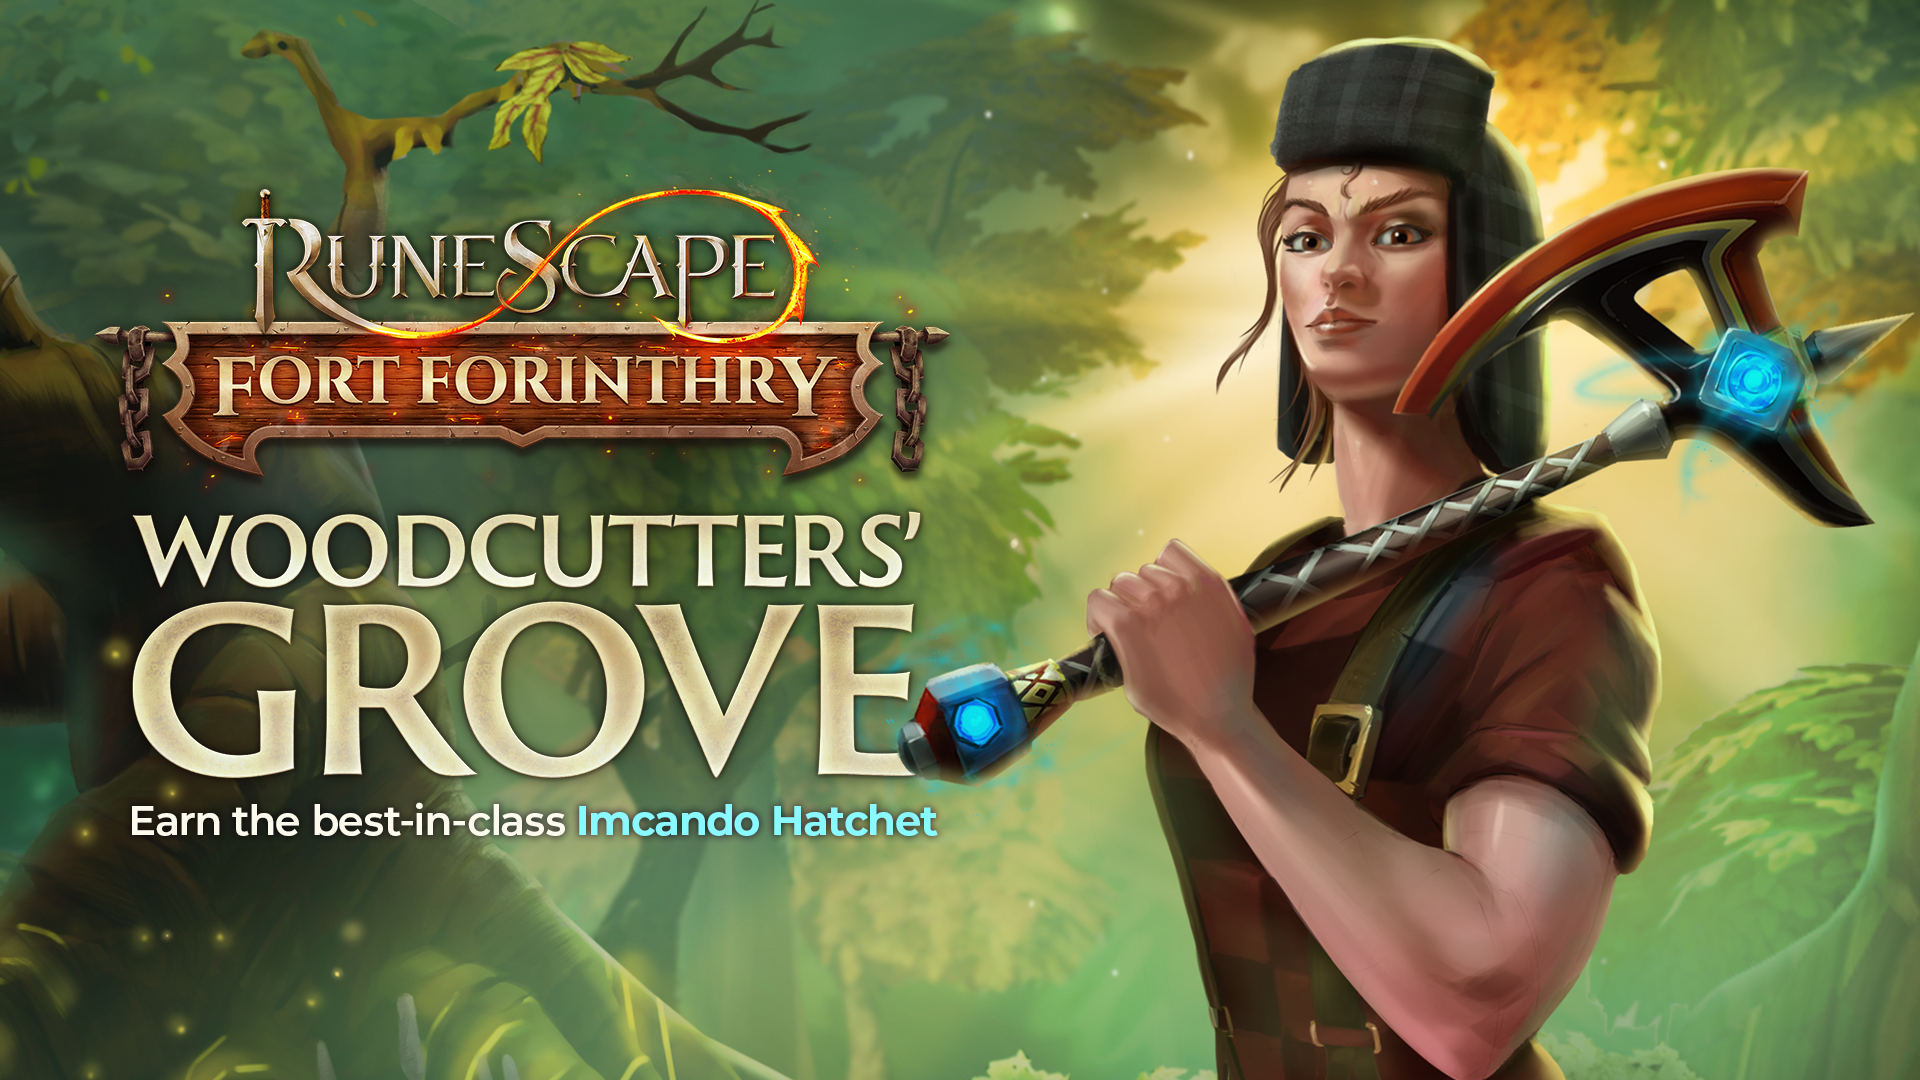 RuneScape Announces Exciting Woodcutting Expansion With ‘Woodcutters’ Grove – Fort Forinthry Season Update’